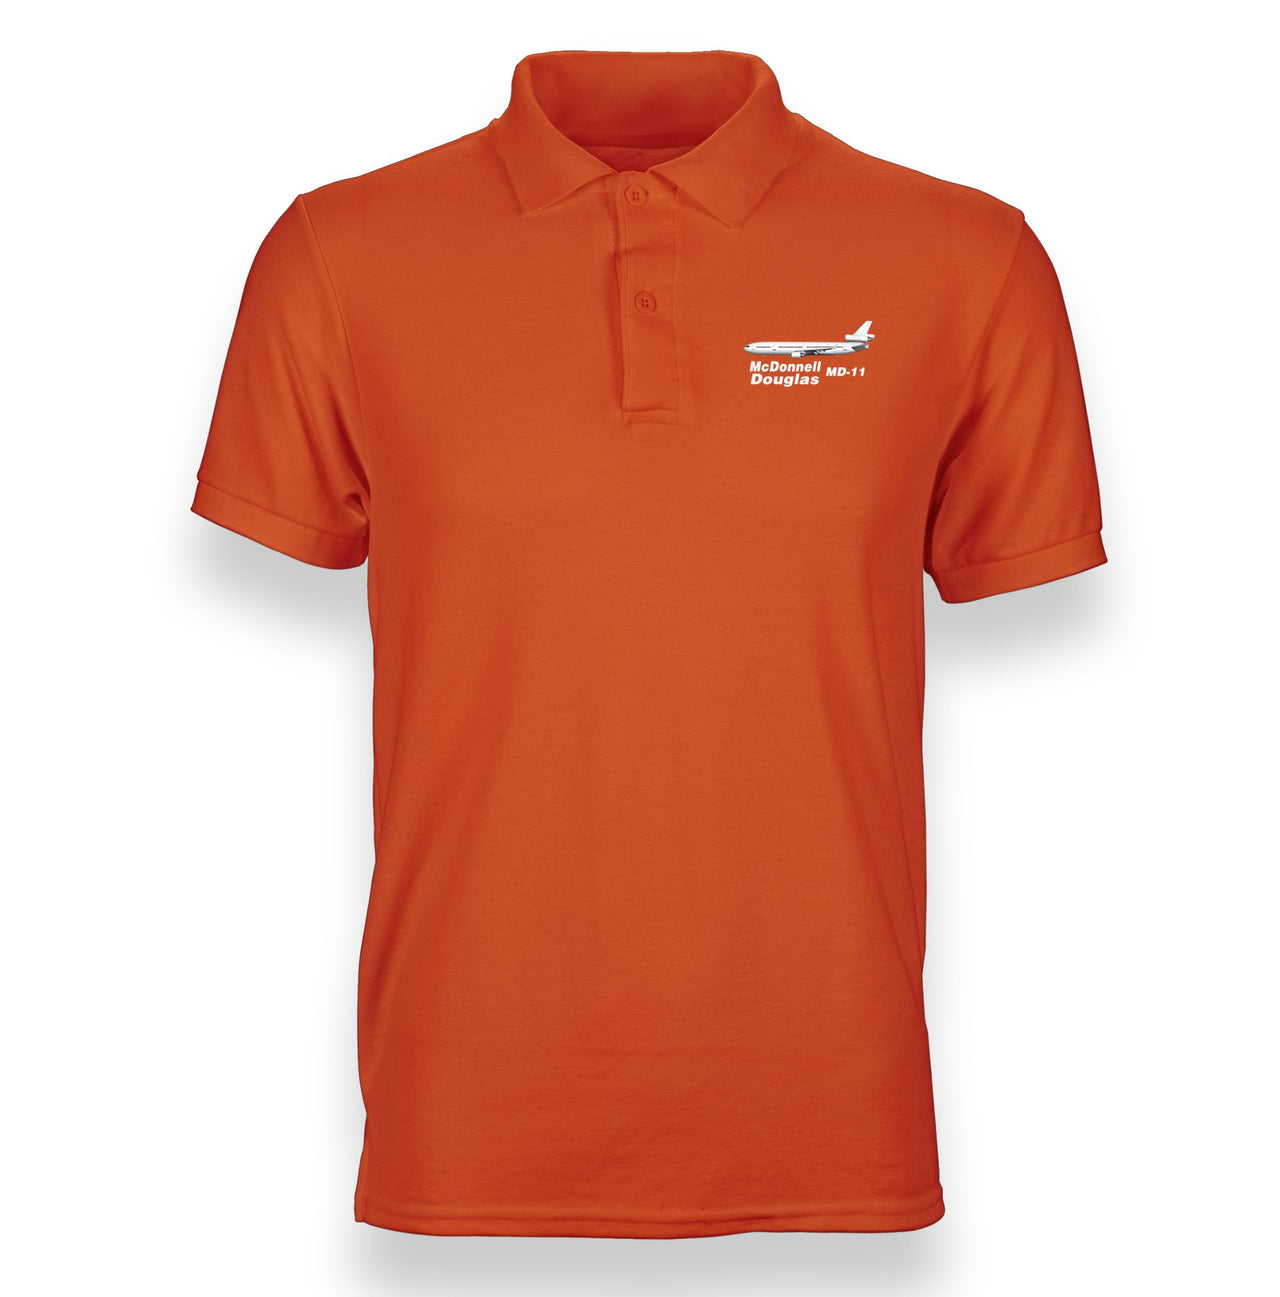 The McDonnell Douglas MD-11 Designed "WOMEN" Polo T-Shirts